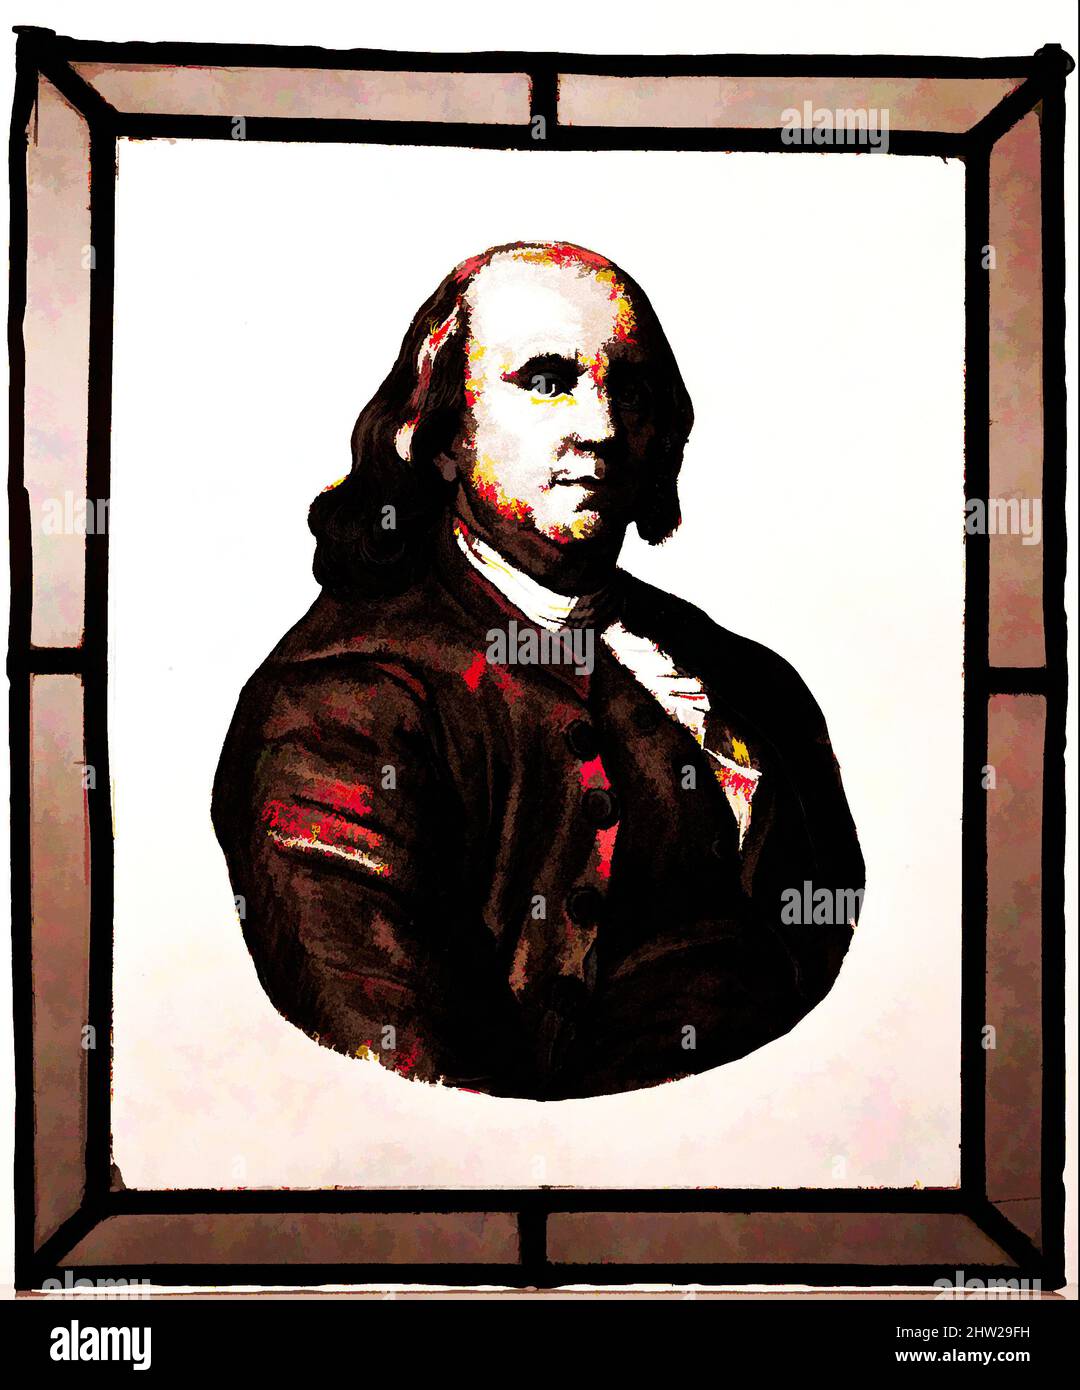 Art inspired by Portrait of Benjamin Franklin, 1800–1883, Probably made in France, Painted glass, 11 3/8 x 9 1/2 in. (28.9 x 24.1 cm), Glass, Classic works modernized by Artotop with a splash of modernity. Shapes, color and value, eye-catching visual impact on art. Emotions through freedom of artworks in a contemporary way. A timeless message pursuing a wildly creative new direction. Artists turning to the digital medium and creating the Artotop NFT Stock Photo